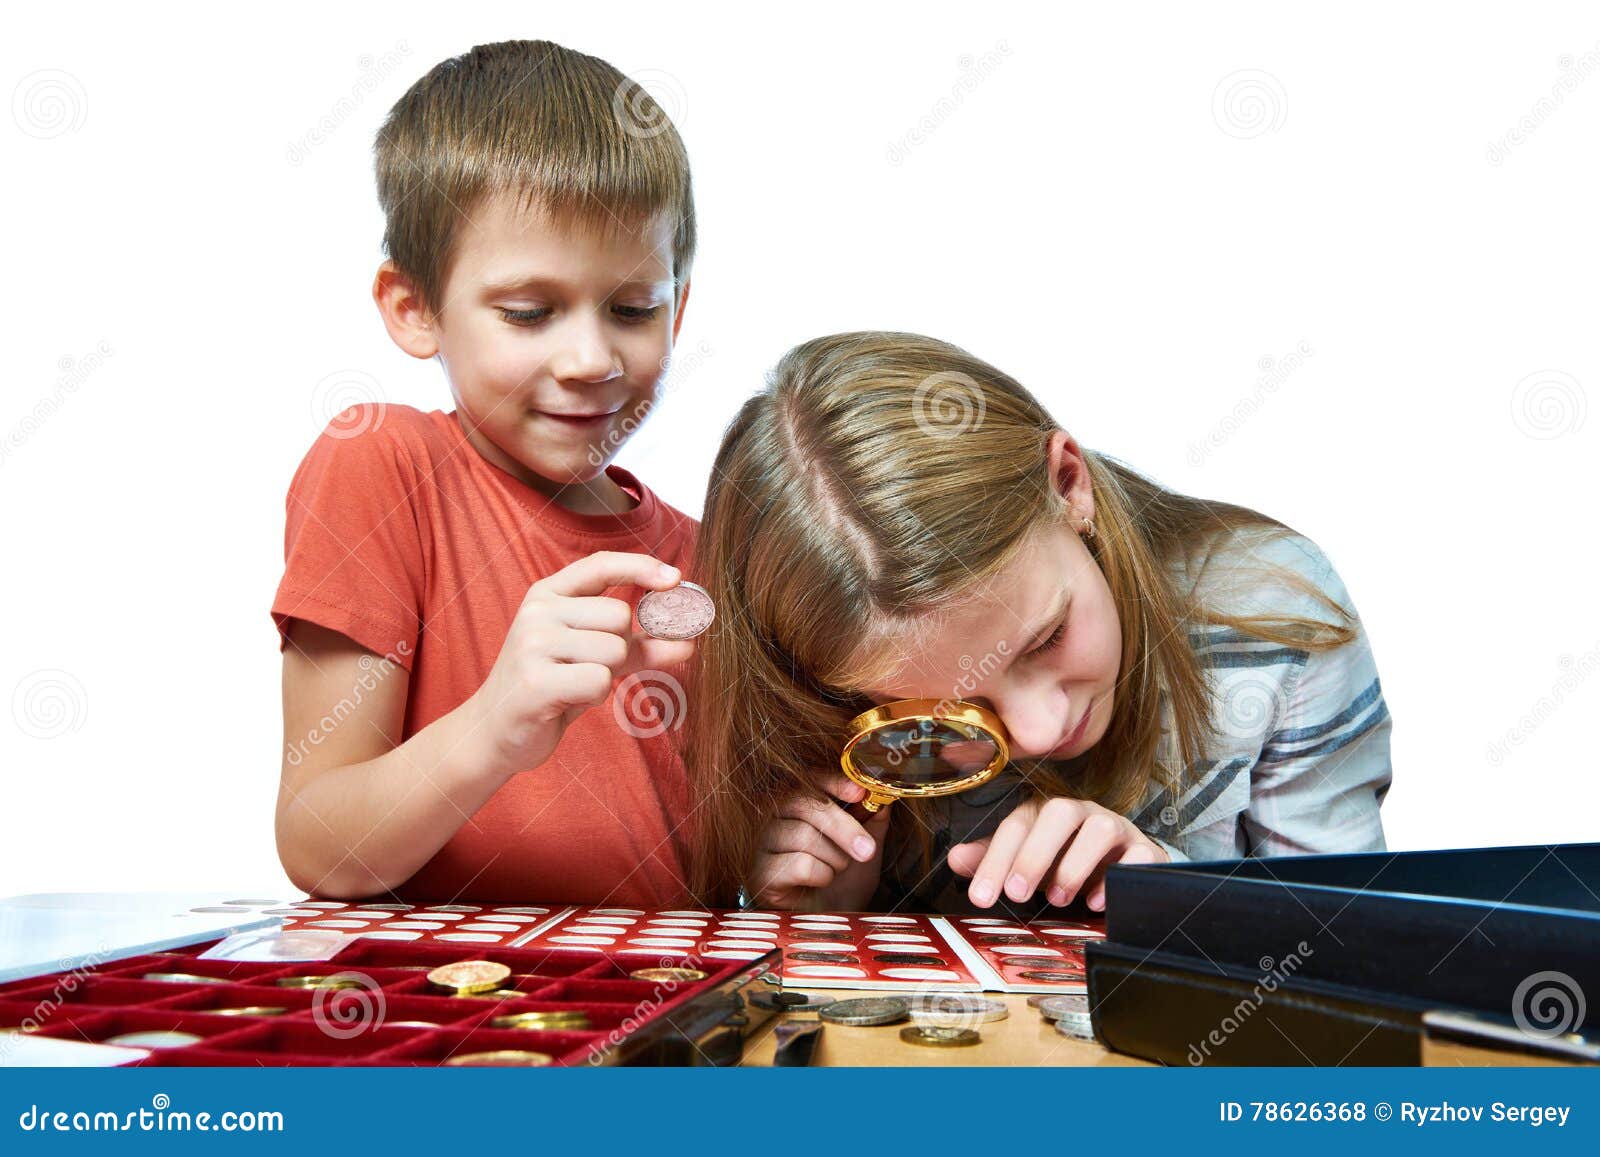 boy and girl are considering coin collection 